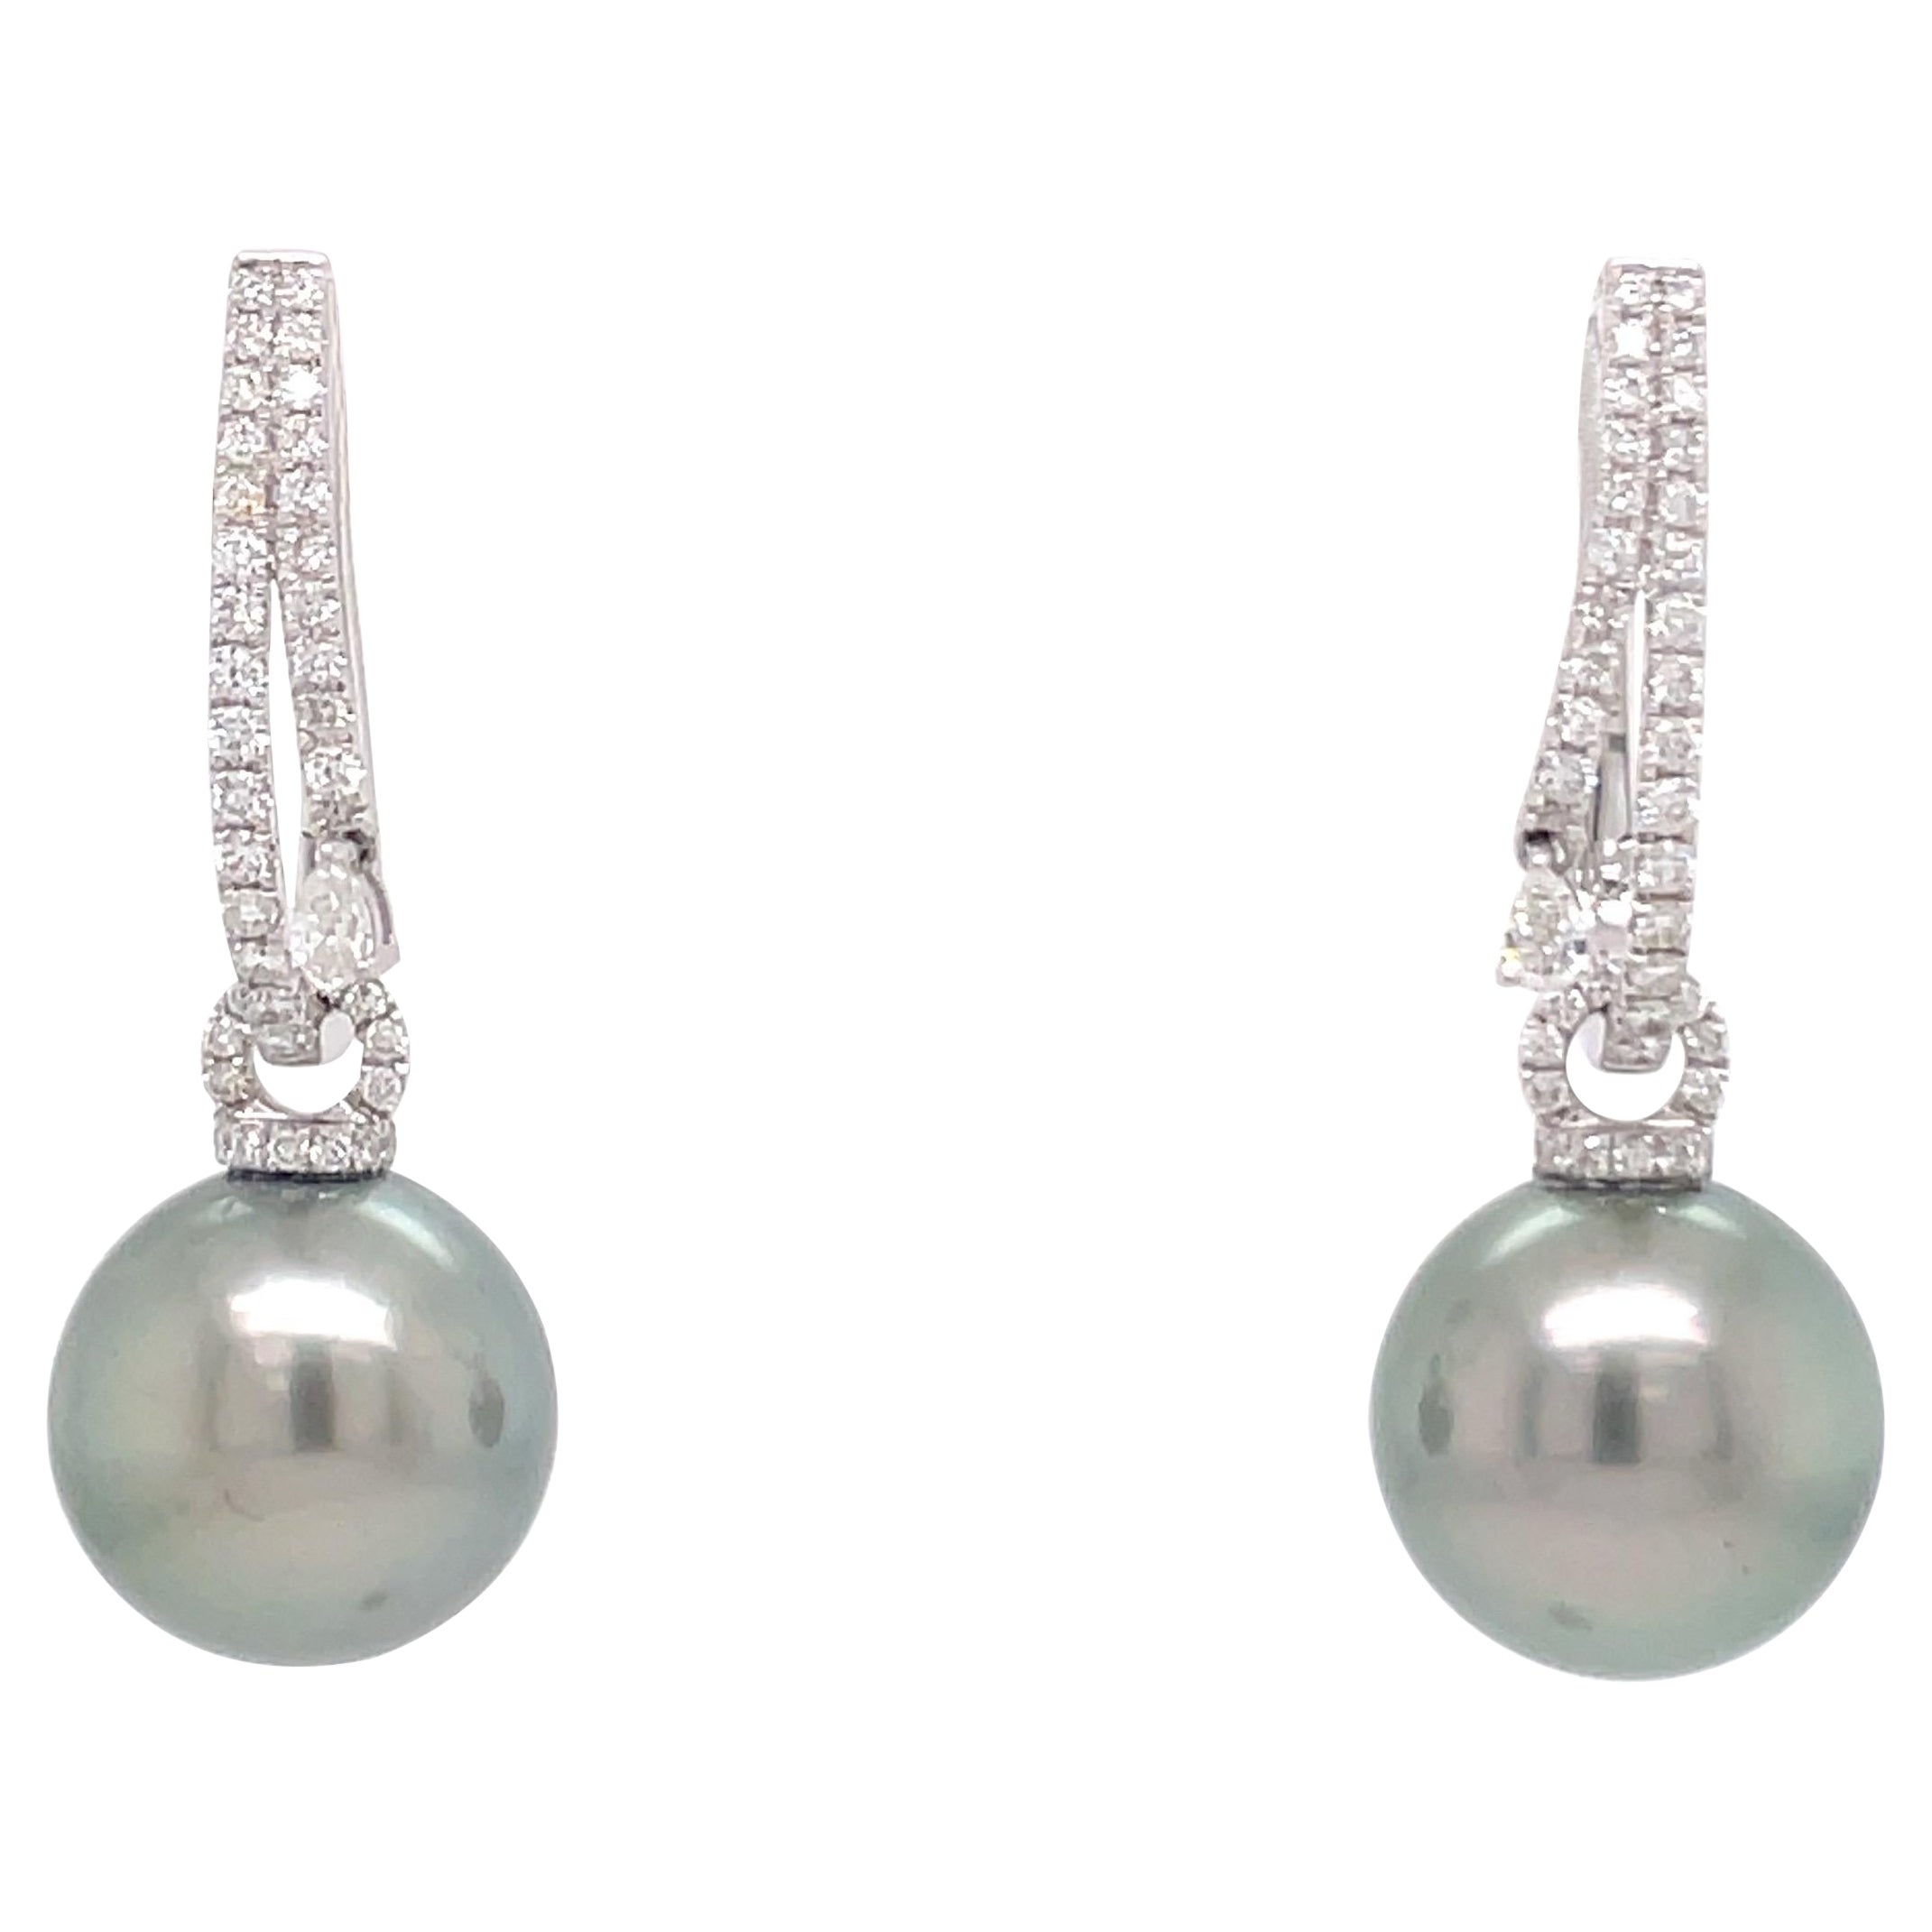 Double Hoop Illusion with Hanging Pear Shape Diamond and Pearl Earring